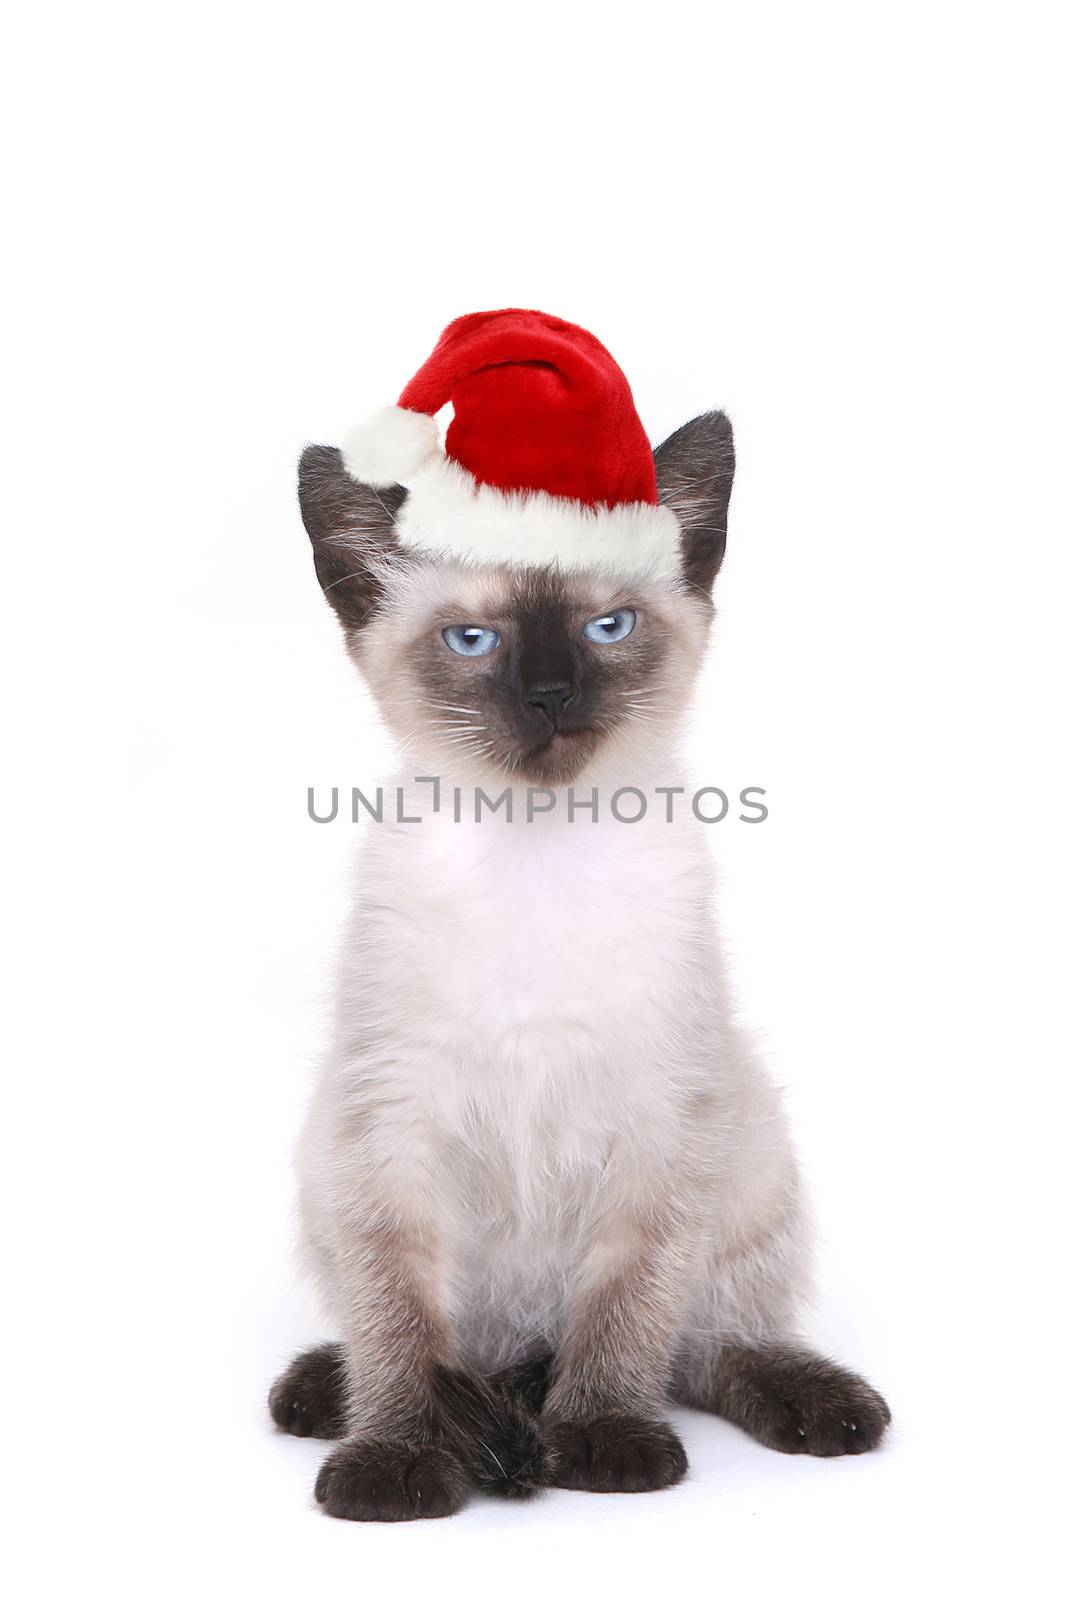 Siamese Kitten on White Looking Mad With Santa Hat